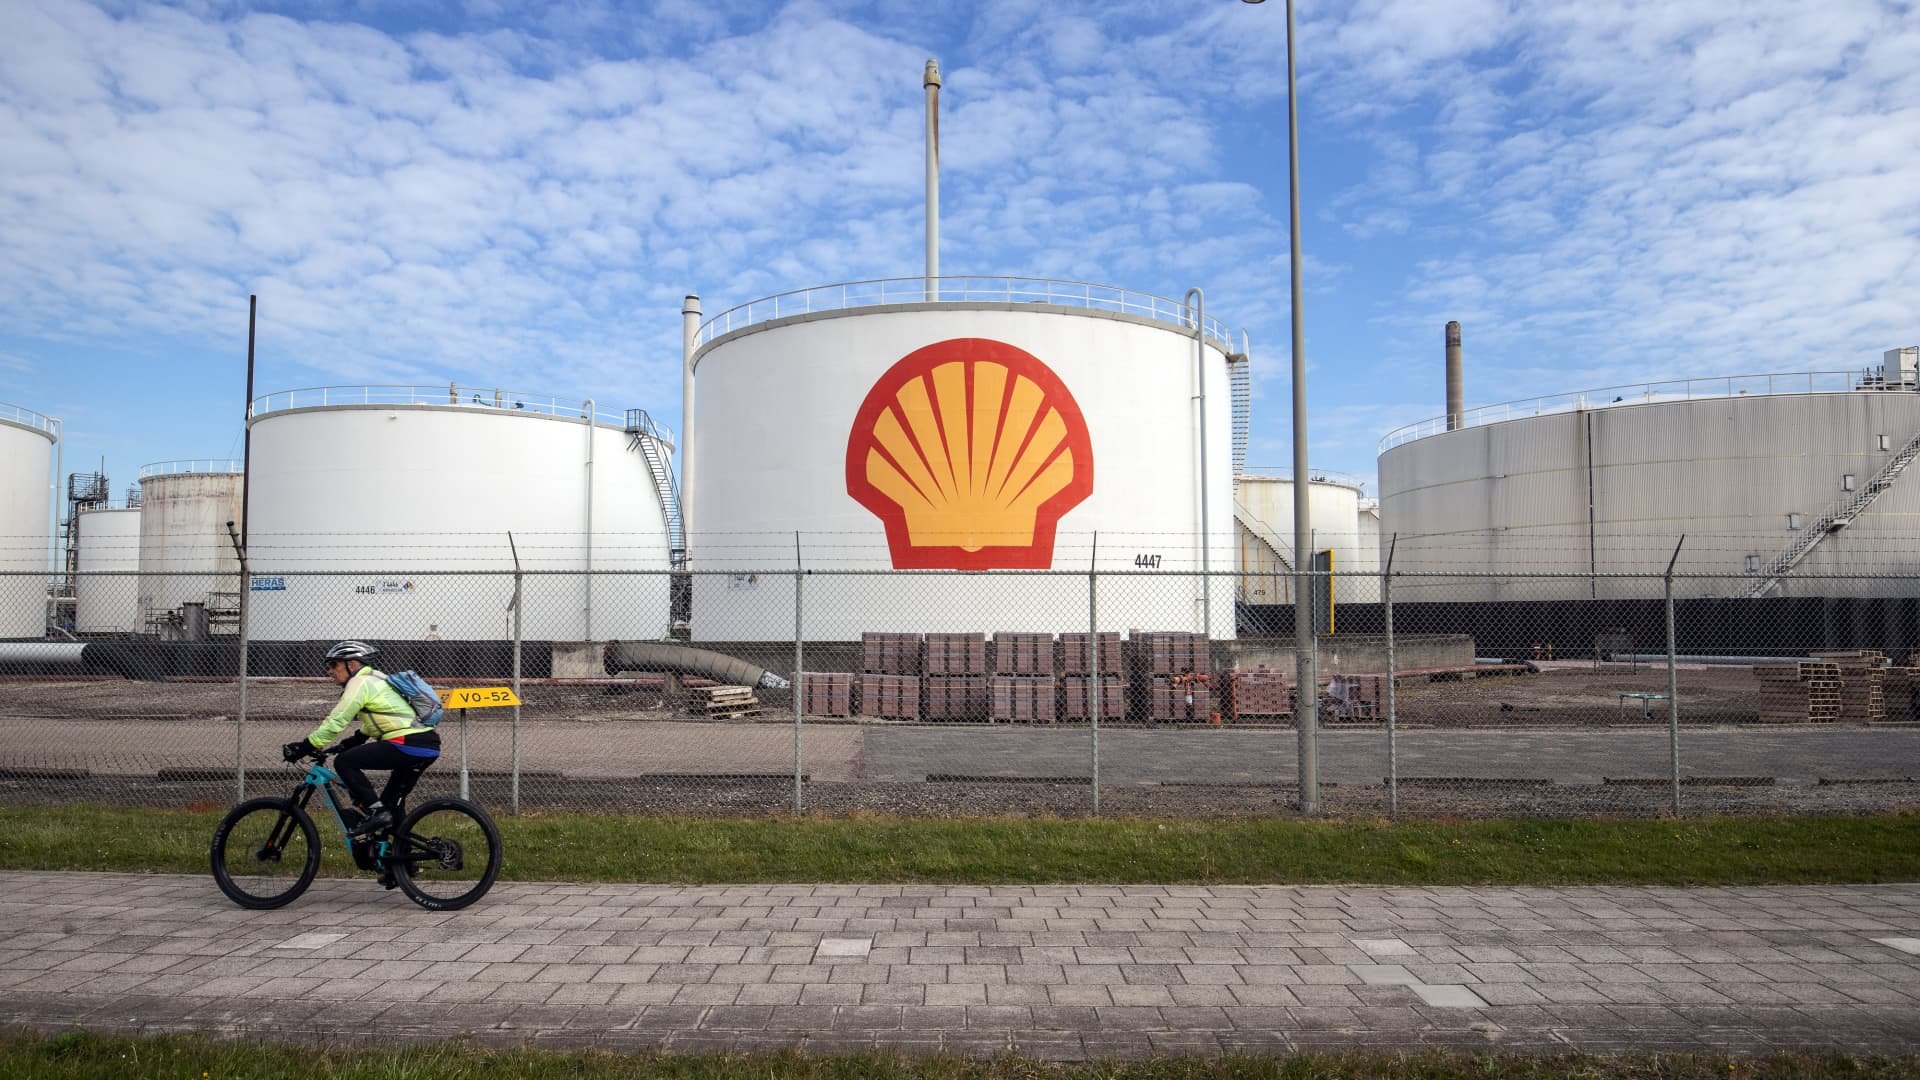 Dutch court rules oil giant Shell must cut carbon emissions by 45% by 2030 in landmark case